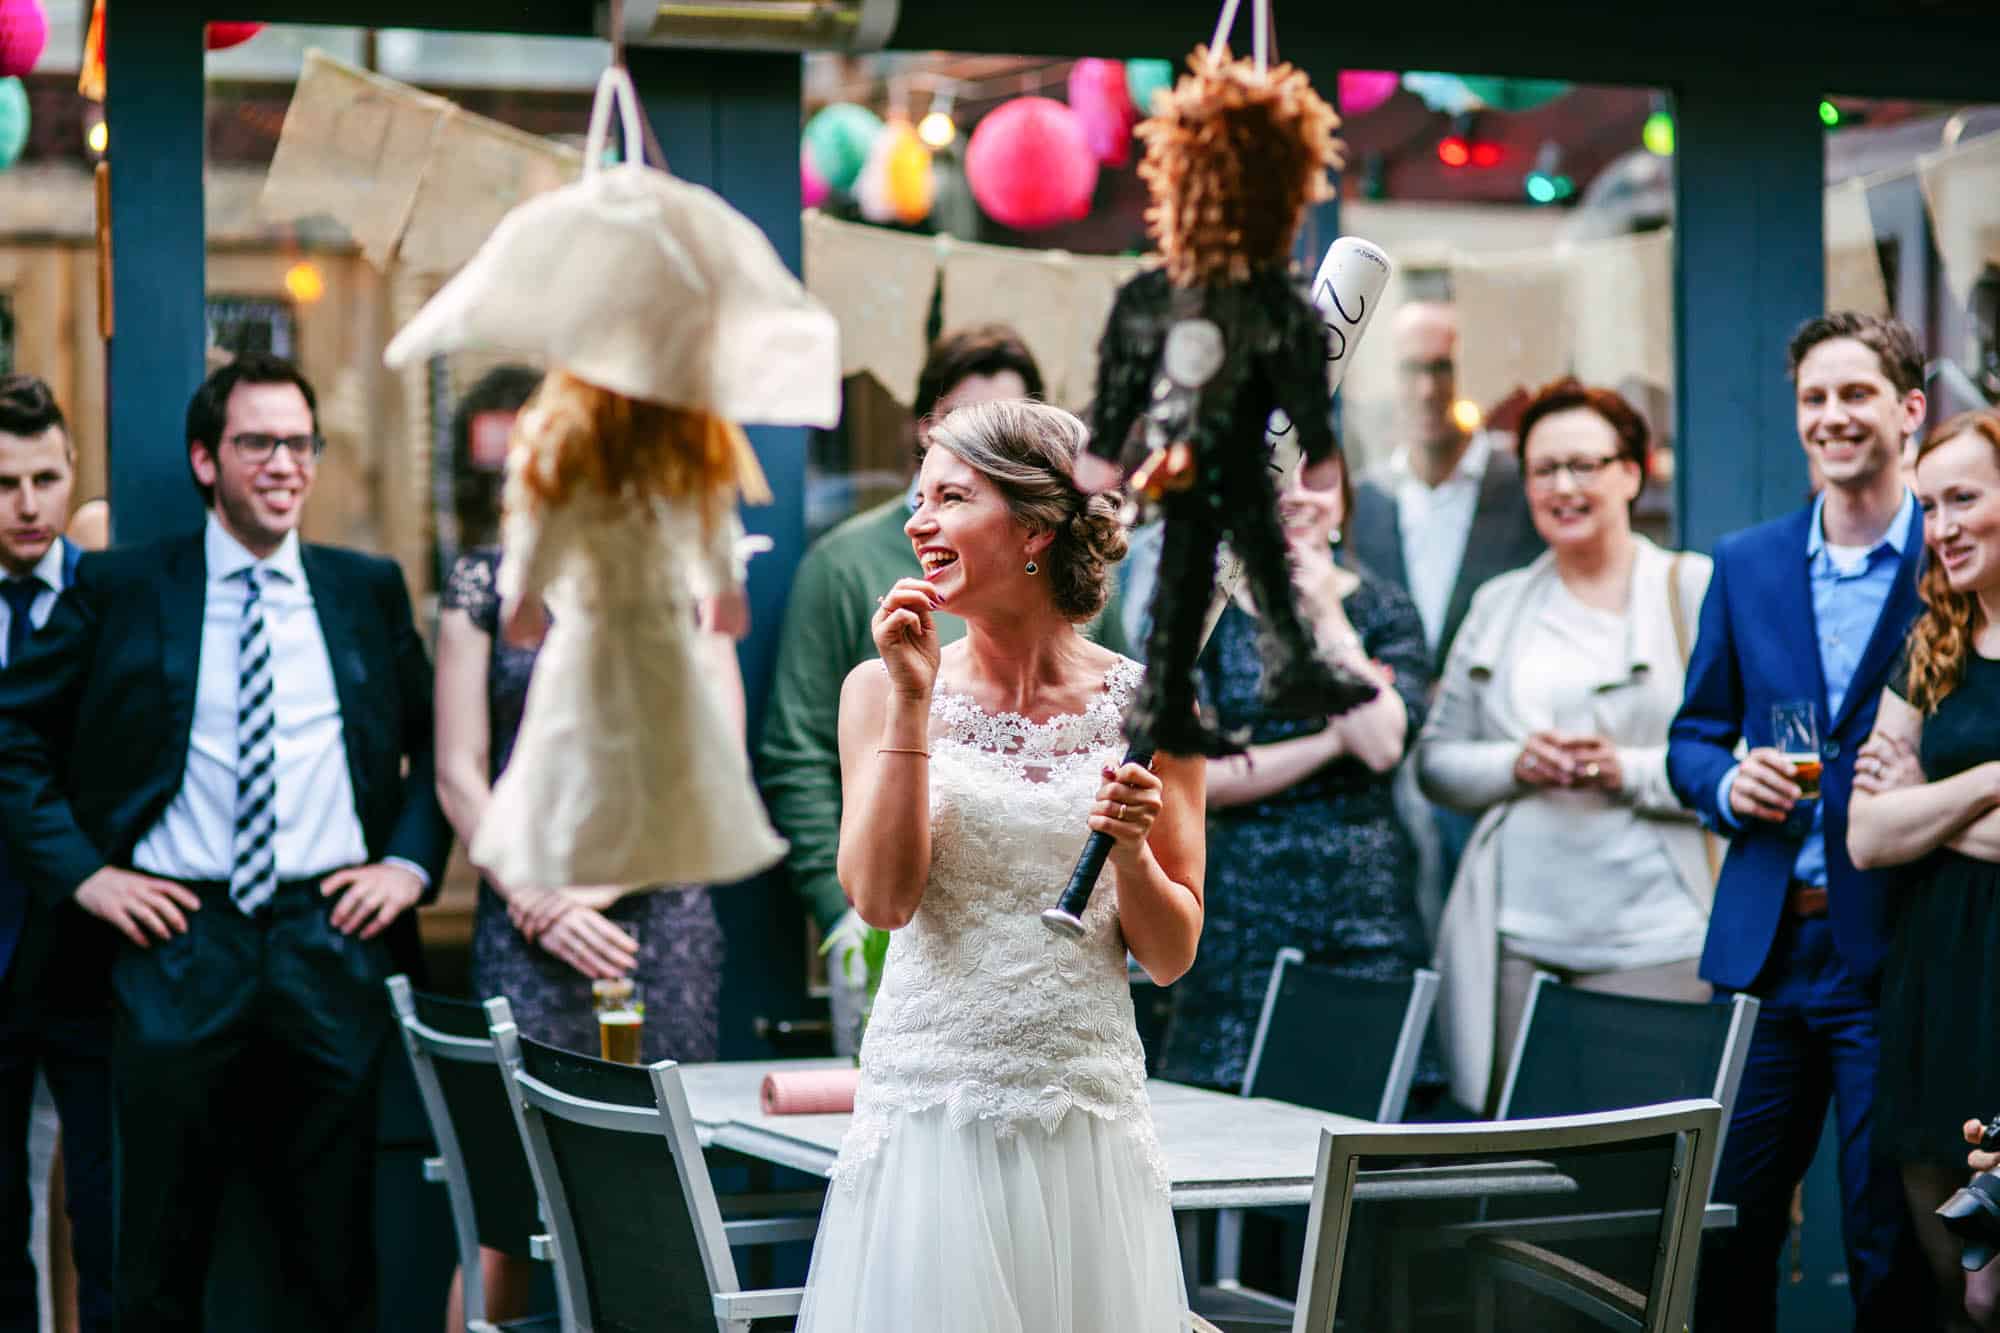 On her wedding day, a bride surprises the audience with an unexpected gift: she holds a doll in front of her.